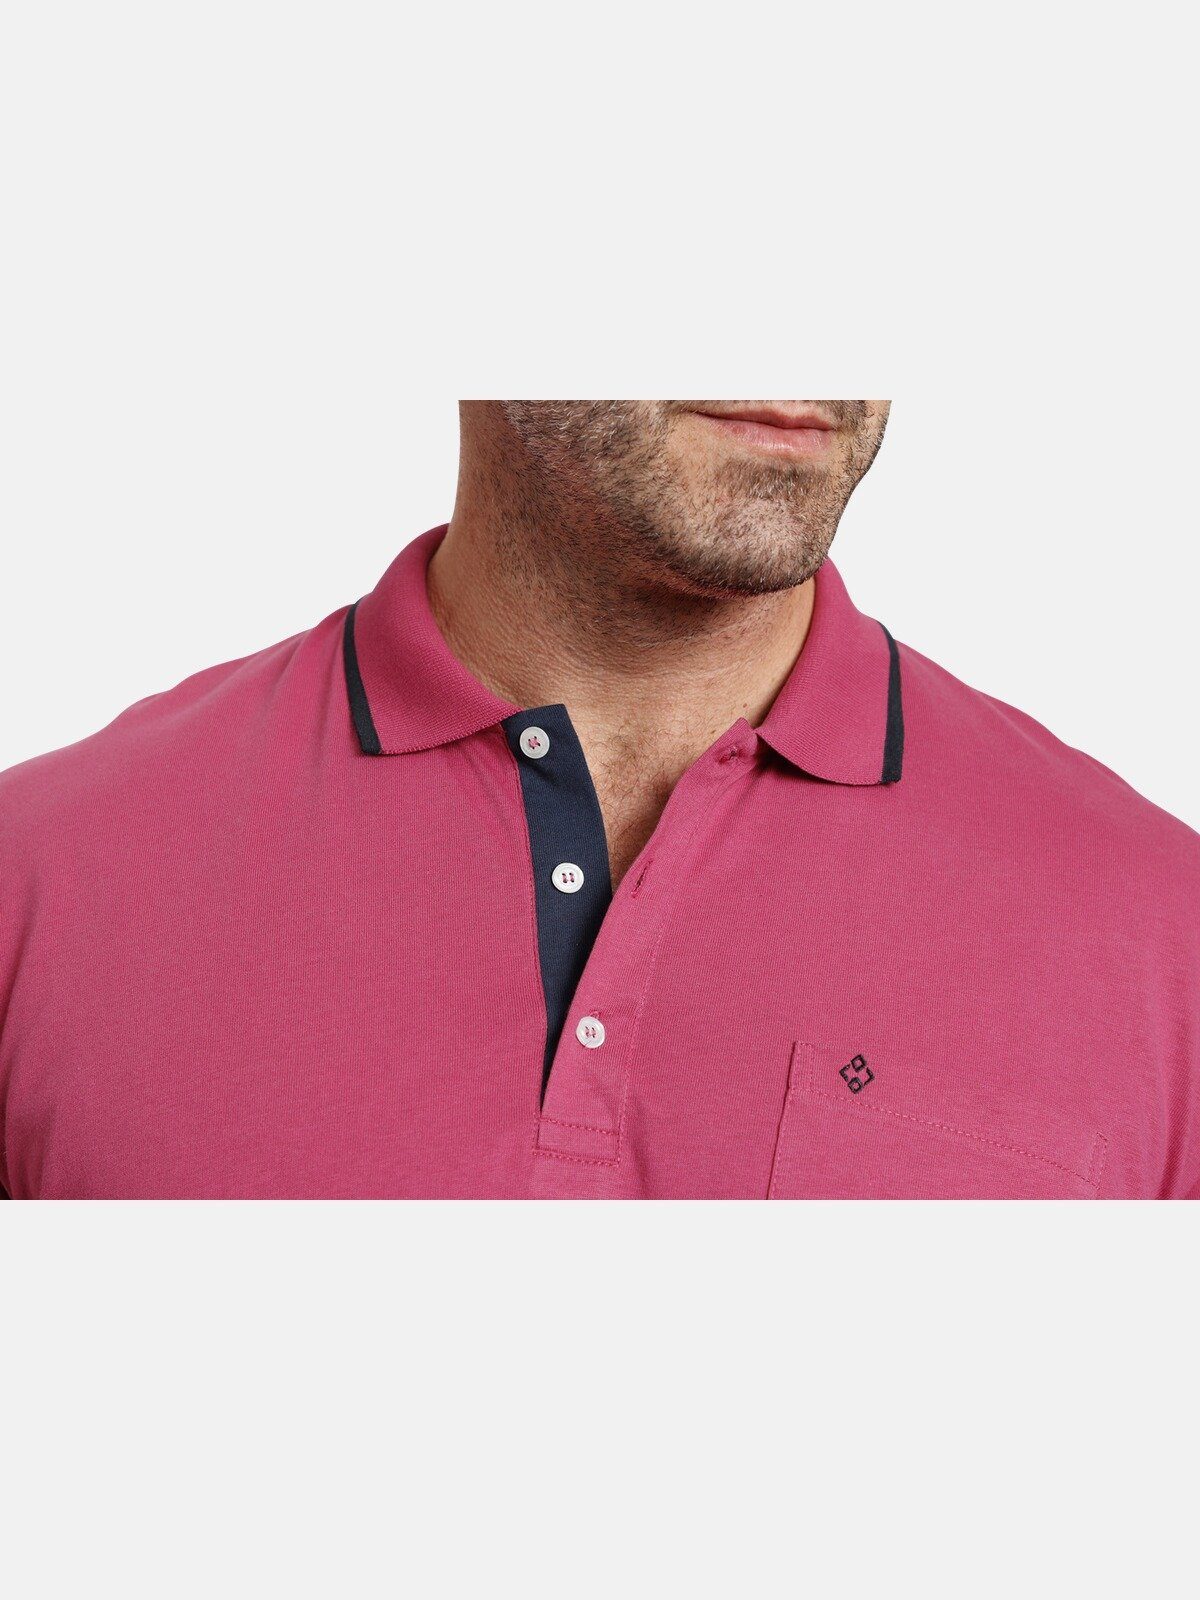 FEN Jersey-Qualität Charles pink Colby bequeme EARL Poloshirt